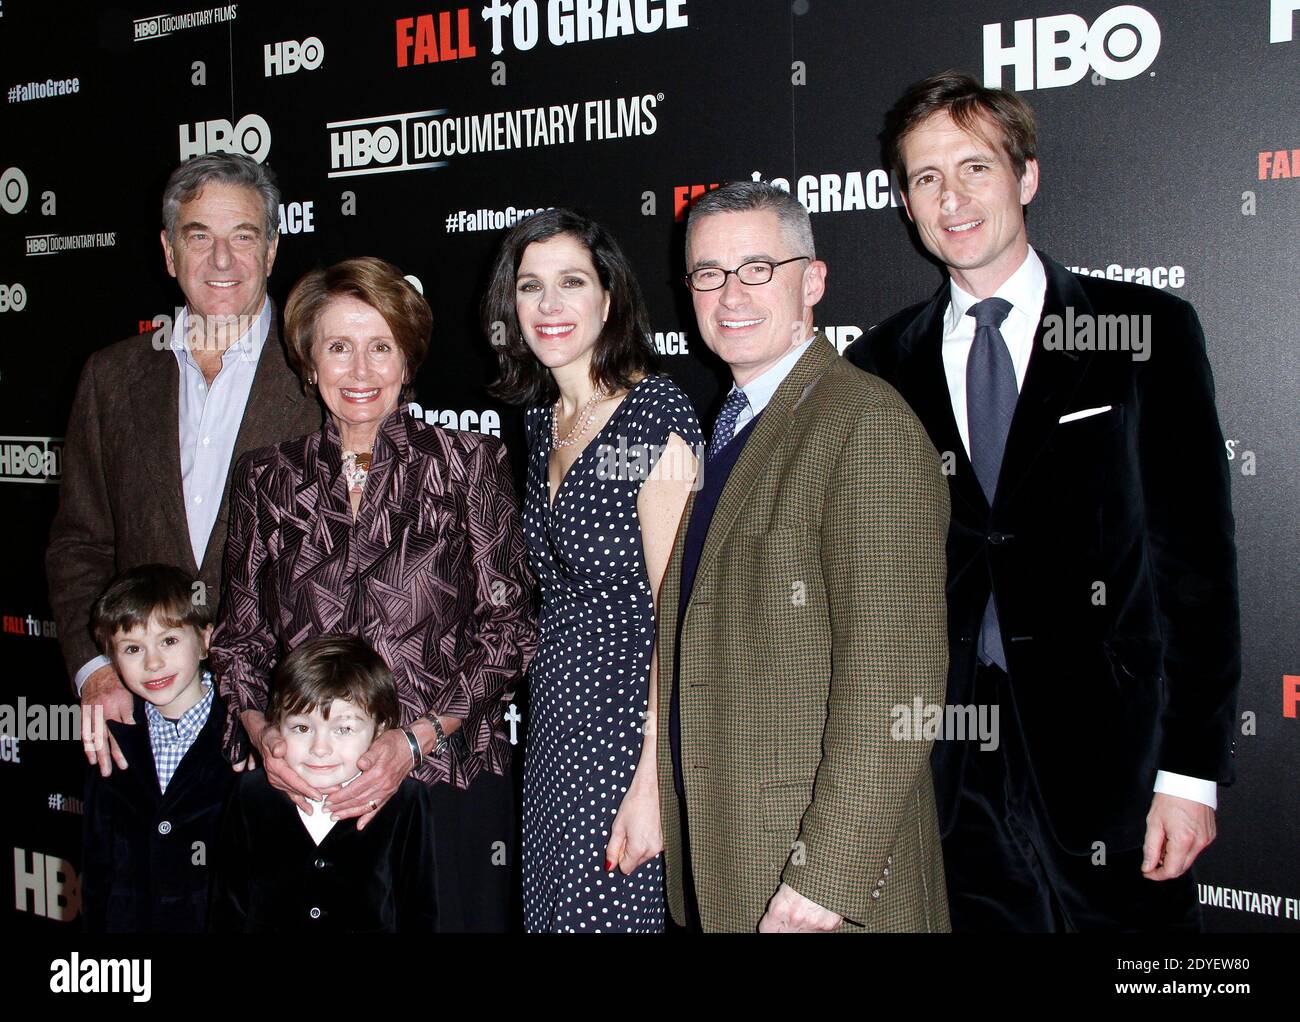 Paul Pelosi, Nancy Pelosi, Alexandra Pelosi, Jim McGreevey and Michiel Vos attend the 'Fall to Grace' HBO Documentary premiere at One Time Warner Center in New York City, NY, USA on March 21, 2013. Photo by Donna Ward/ABACAPRESS.COM Stock Photo